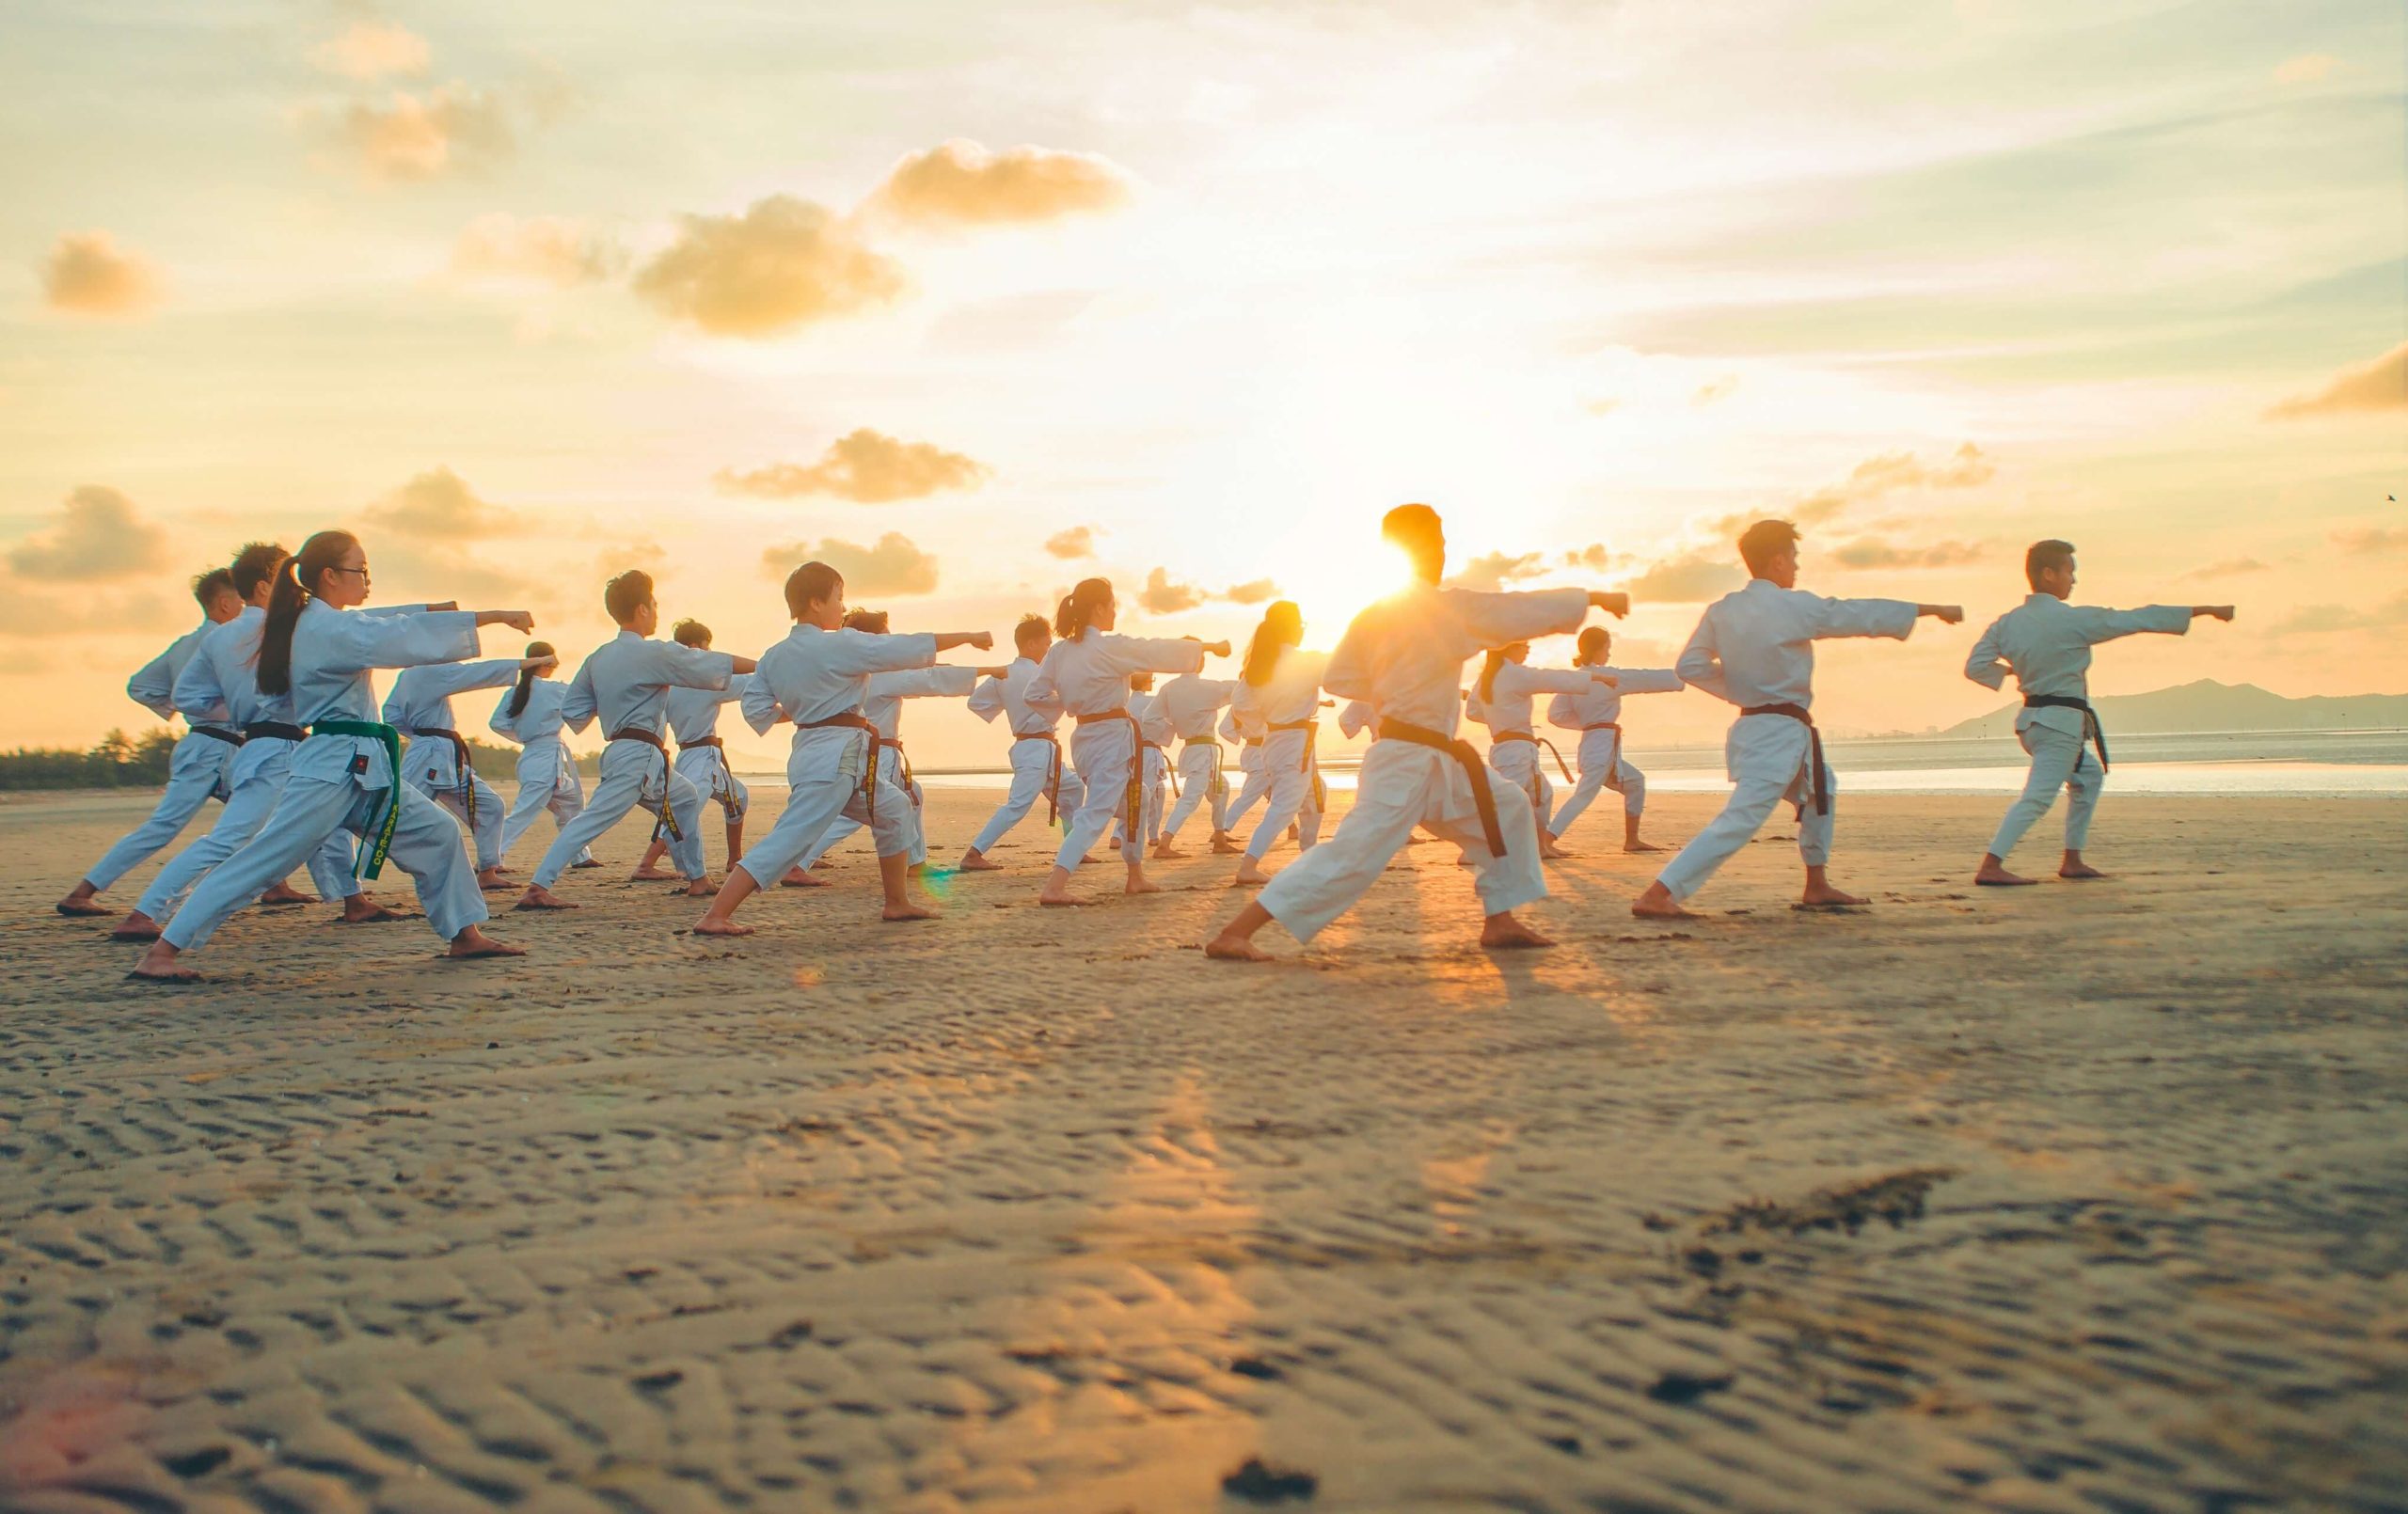 Disciplined martial arts on the beach